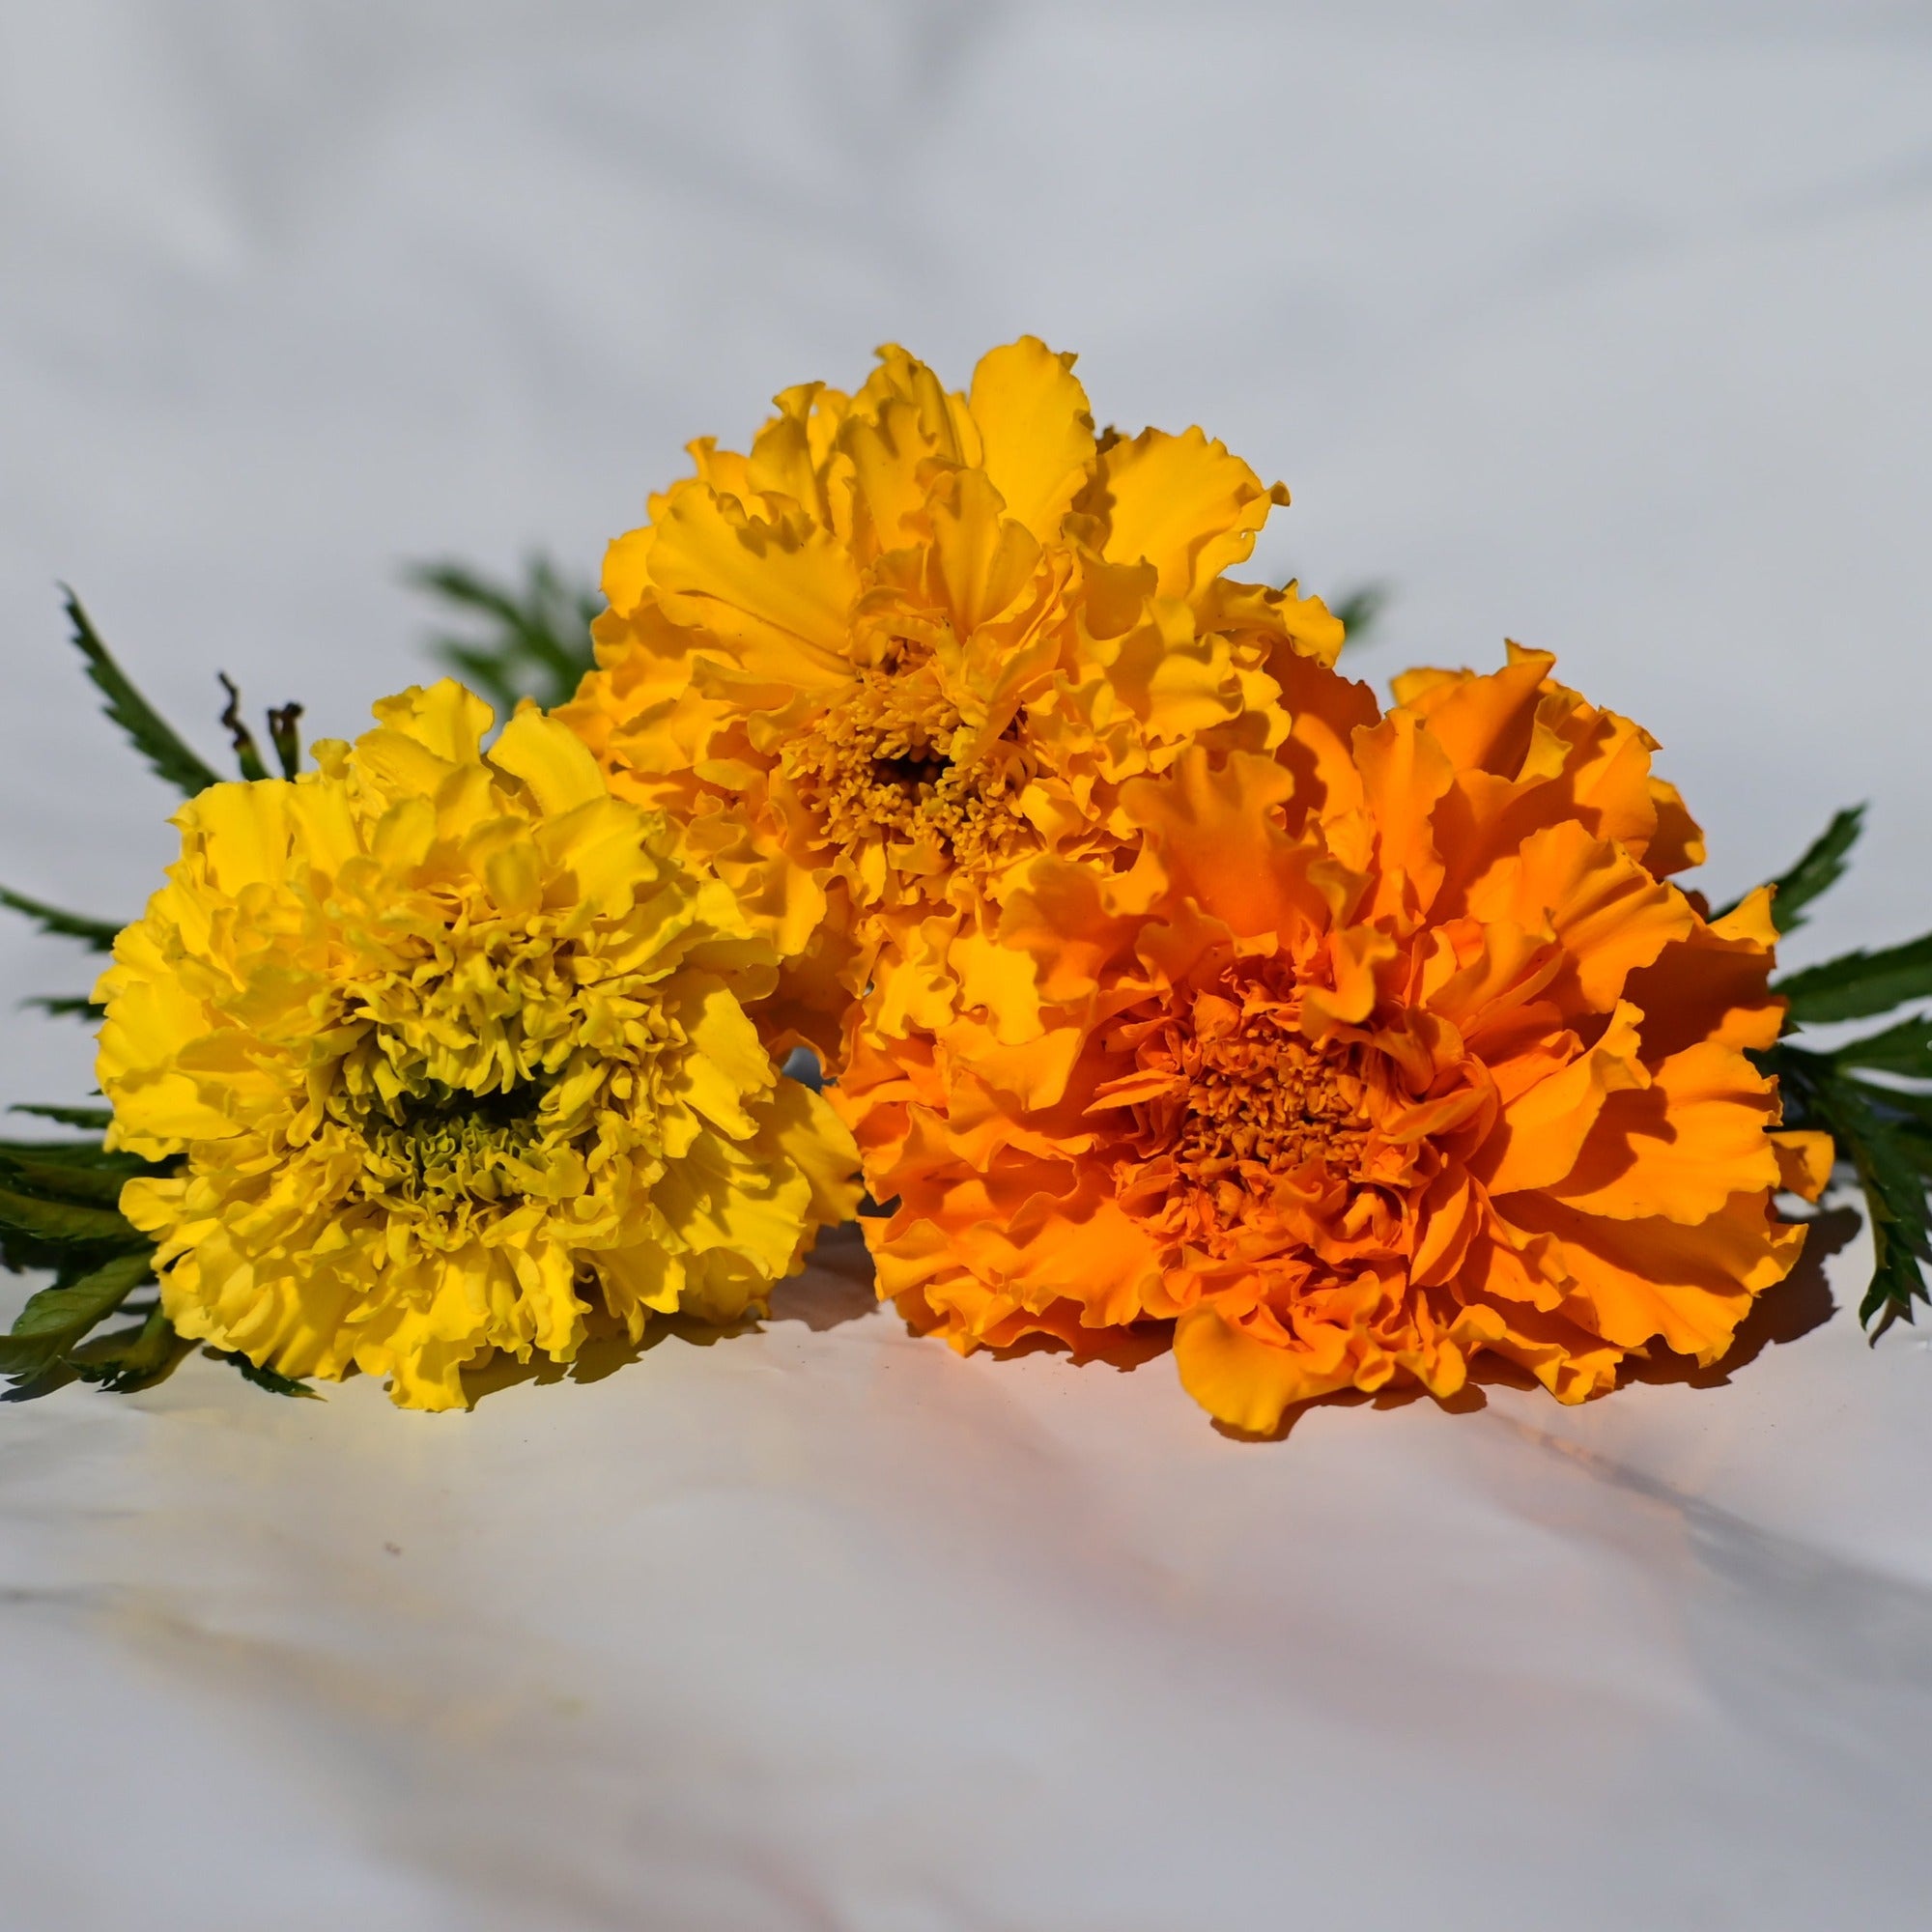 Three shades of gold marigold blooms showcasing colors from yellow to gold to deep orange against a white background